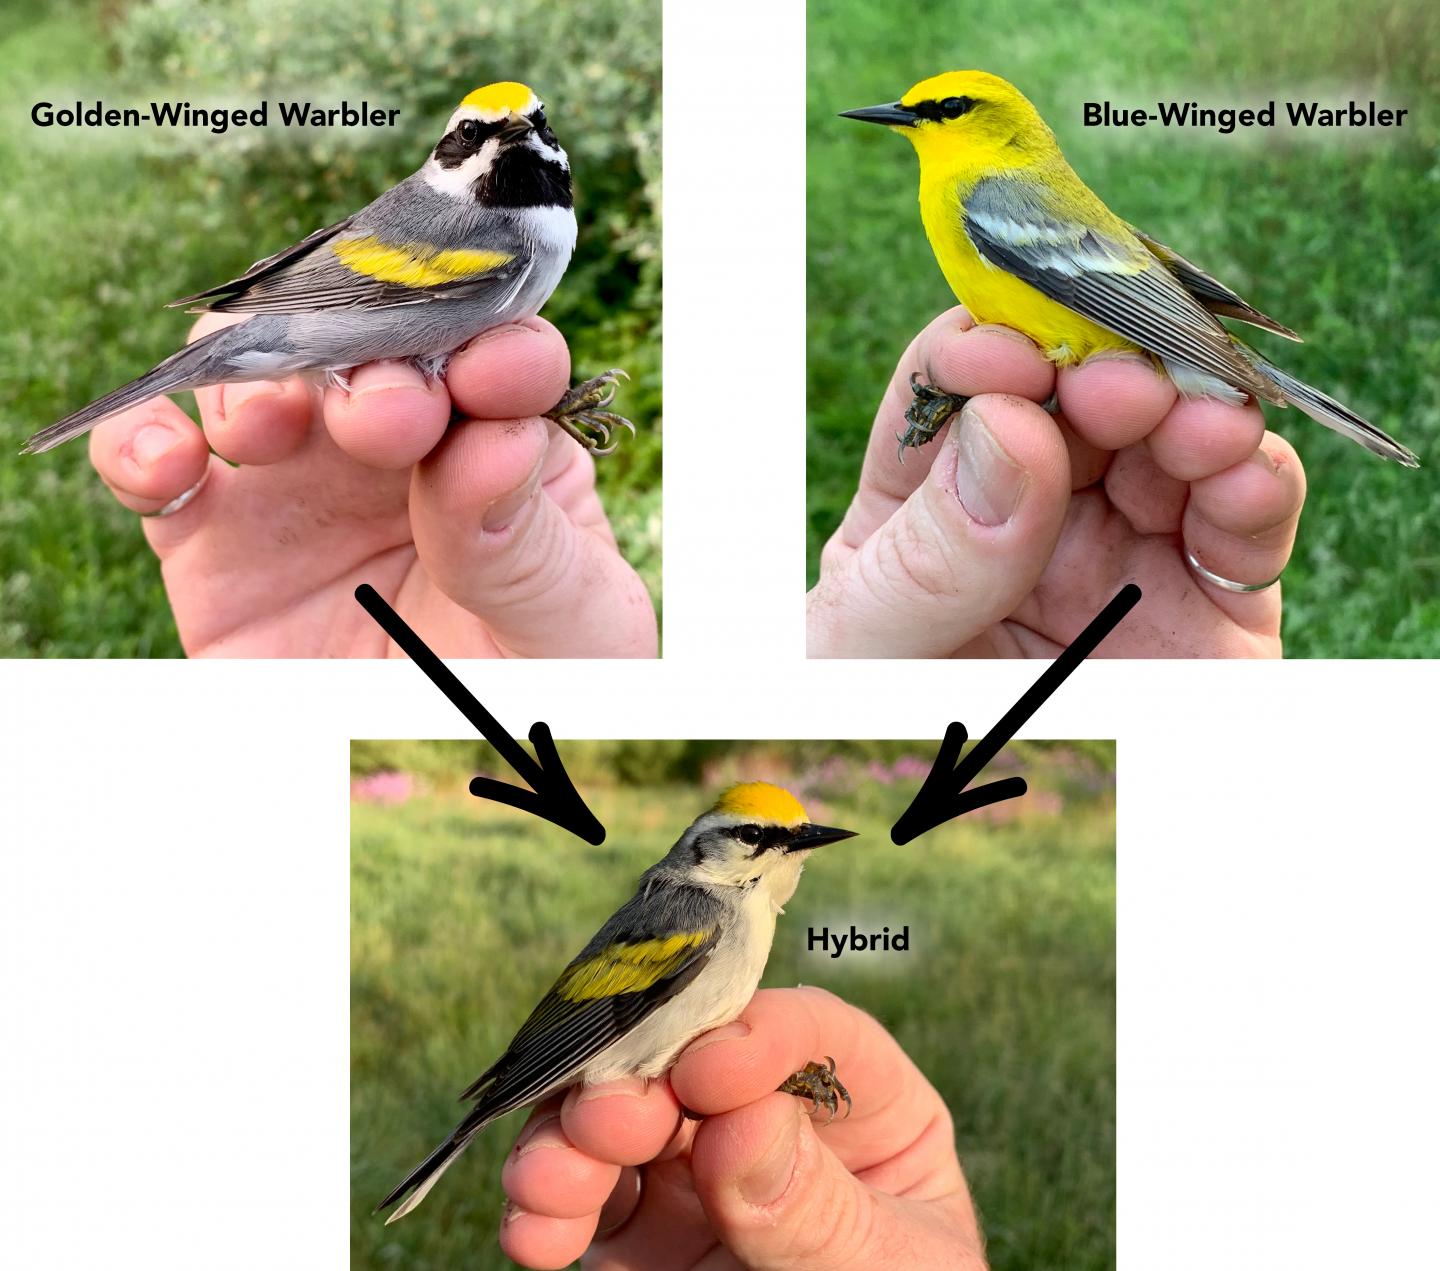 Golden-Winged and Blue-Winged Warblers and Hybrid